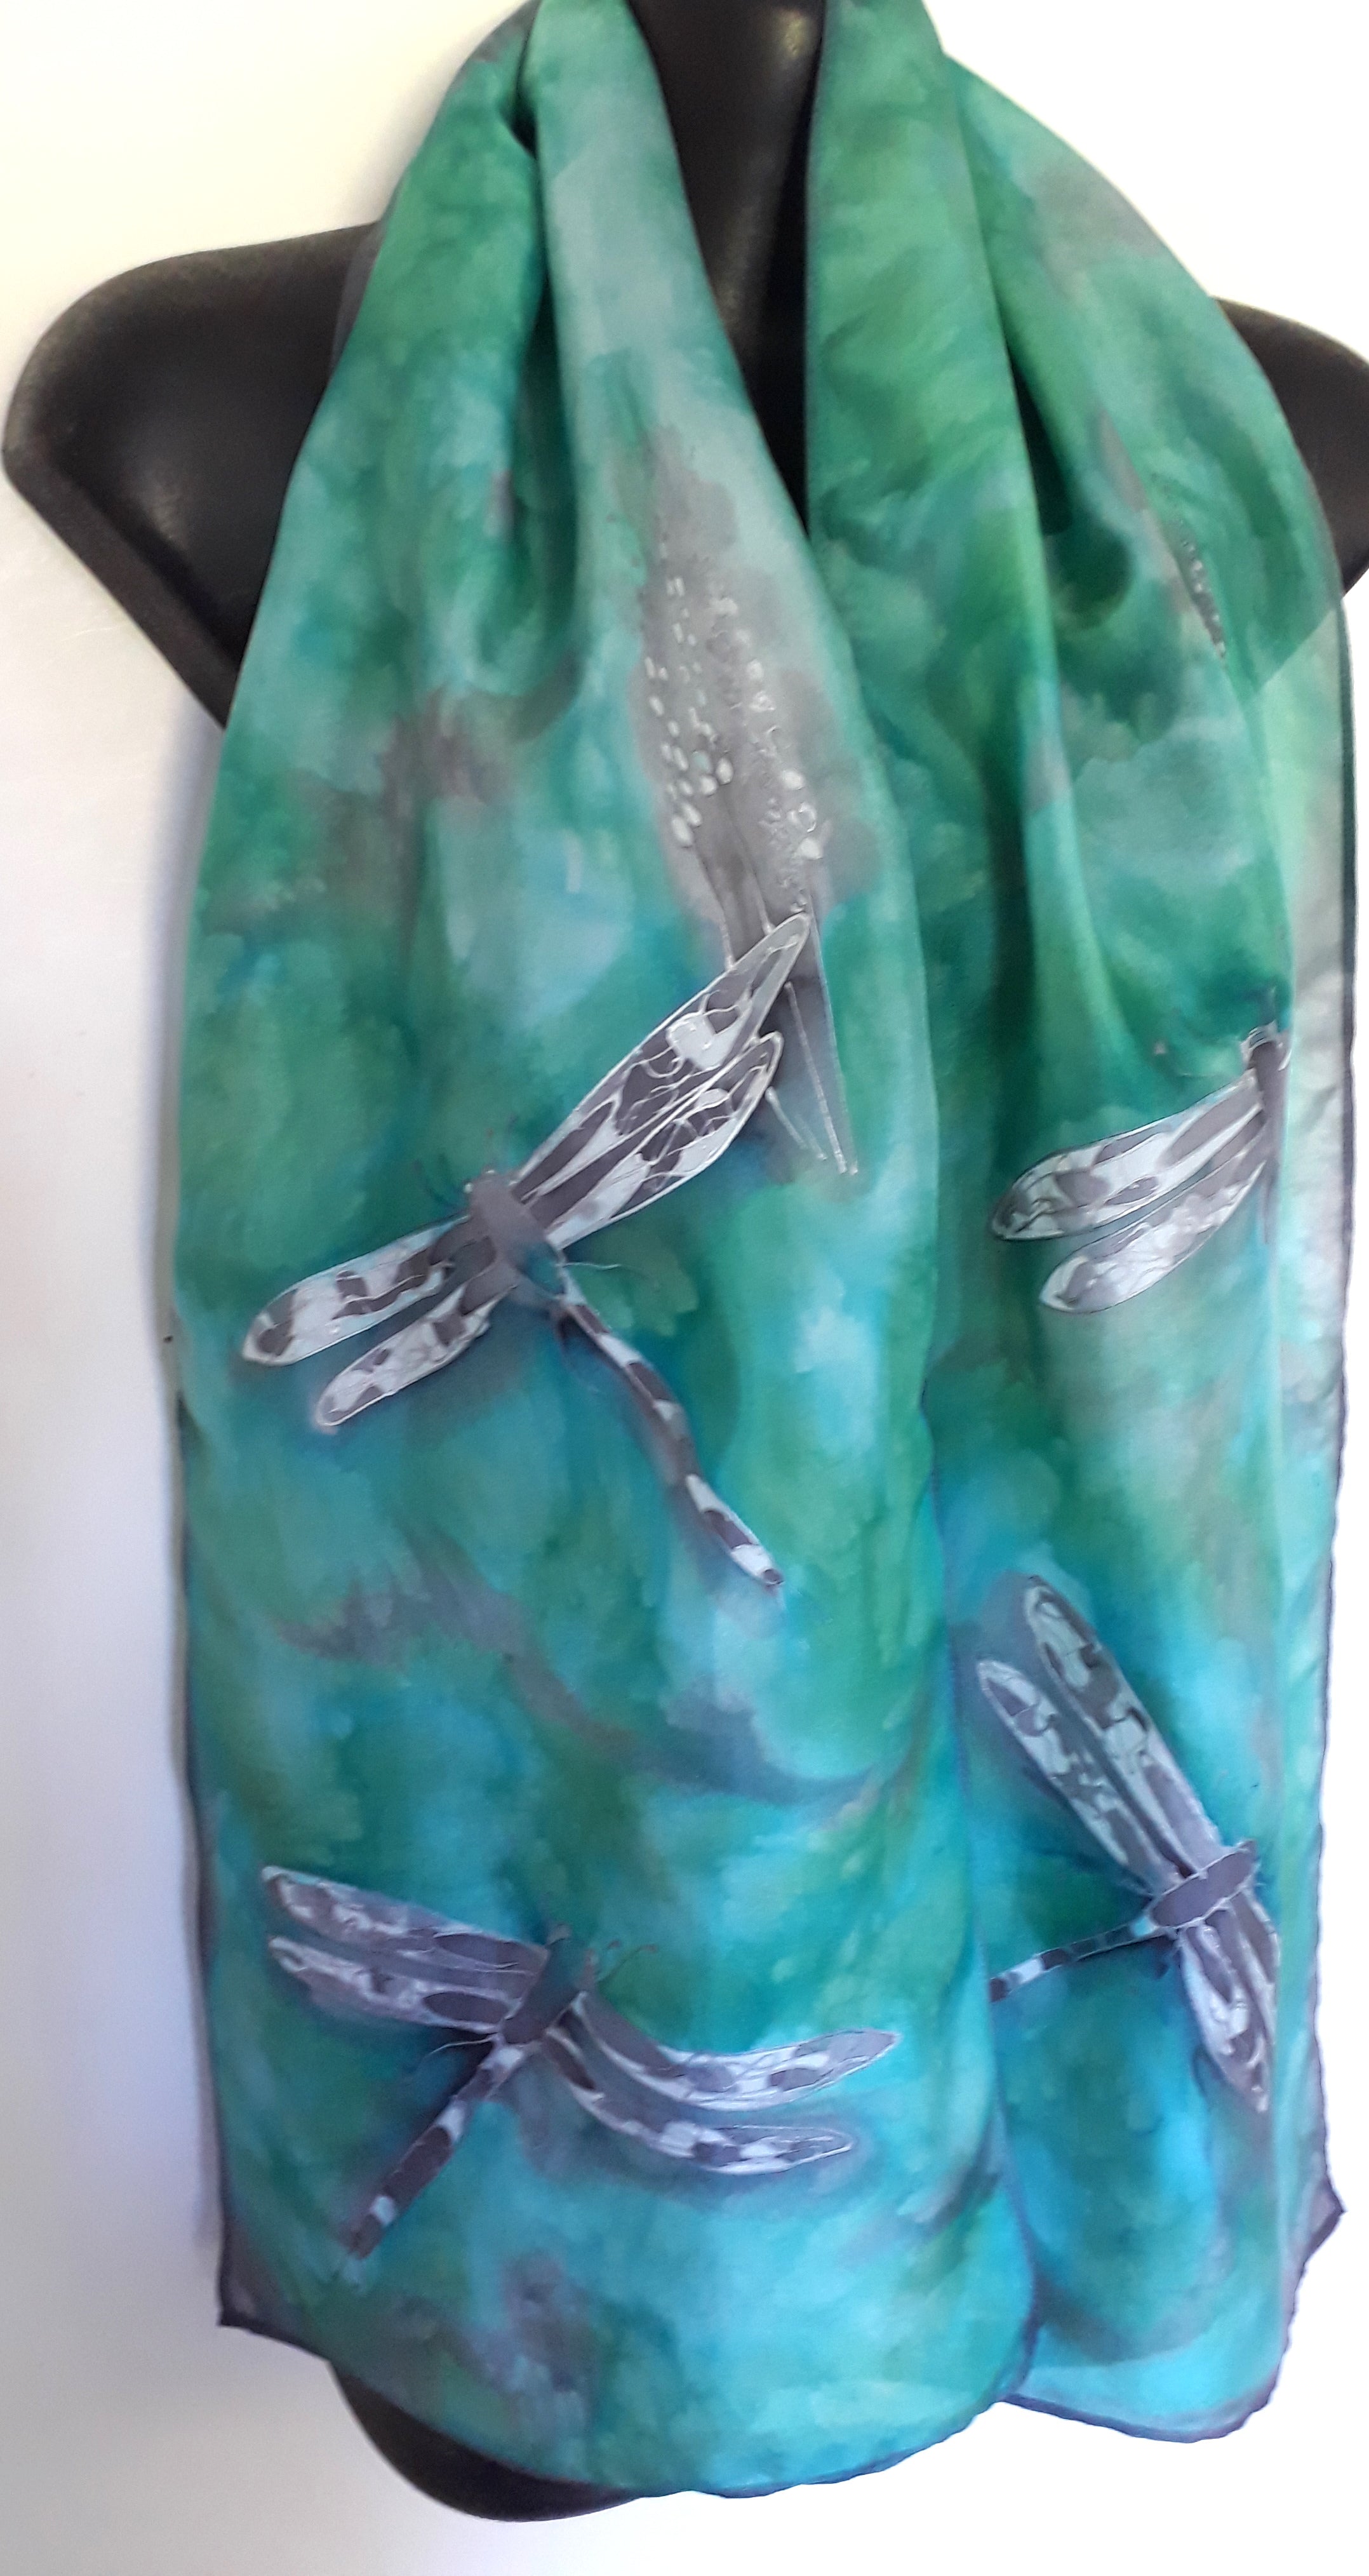 Dragonflies Mint and Sea Green - Hand painted Silk Scarf - Satherley Silks NZ